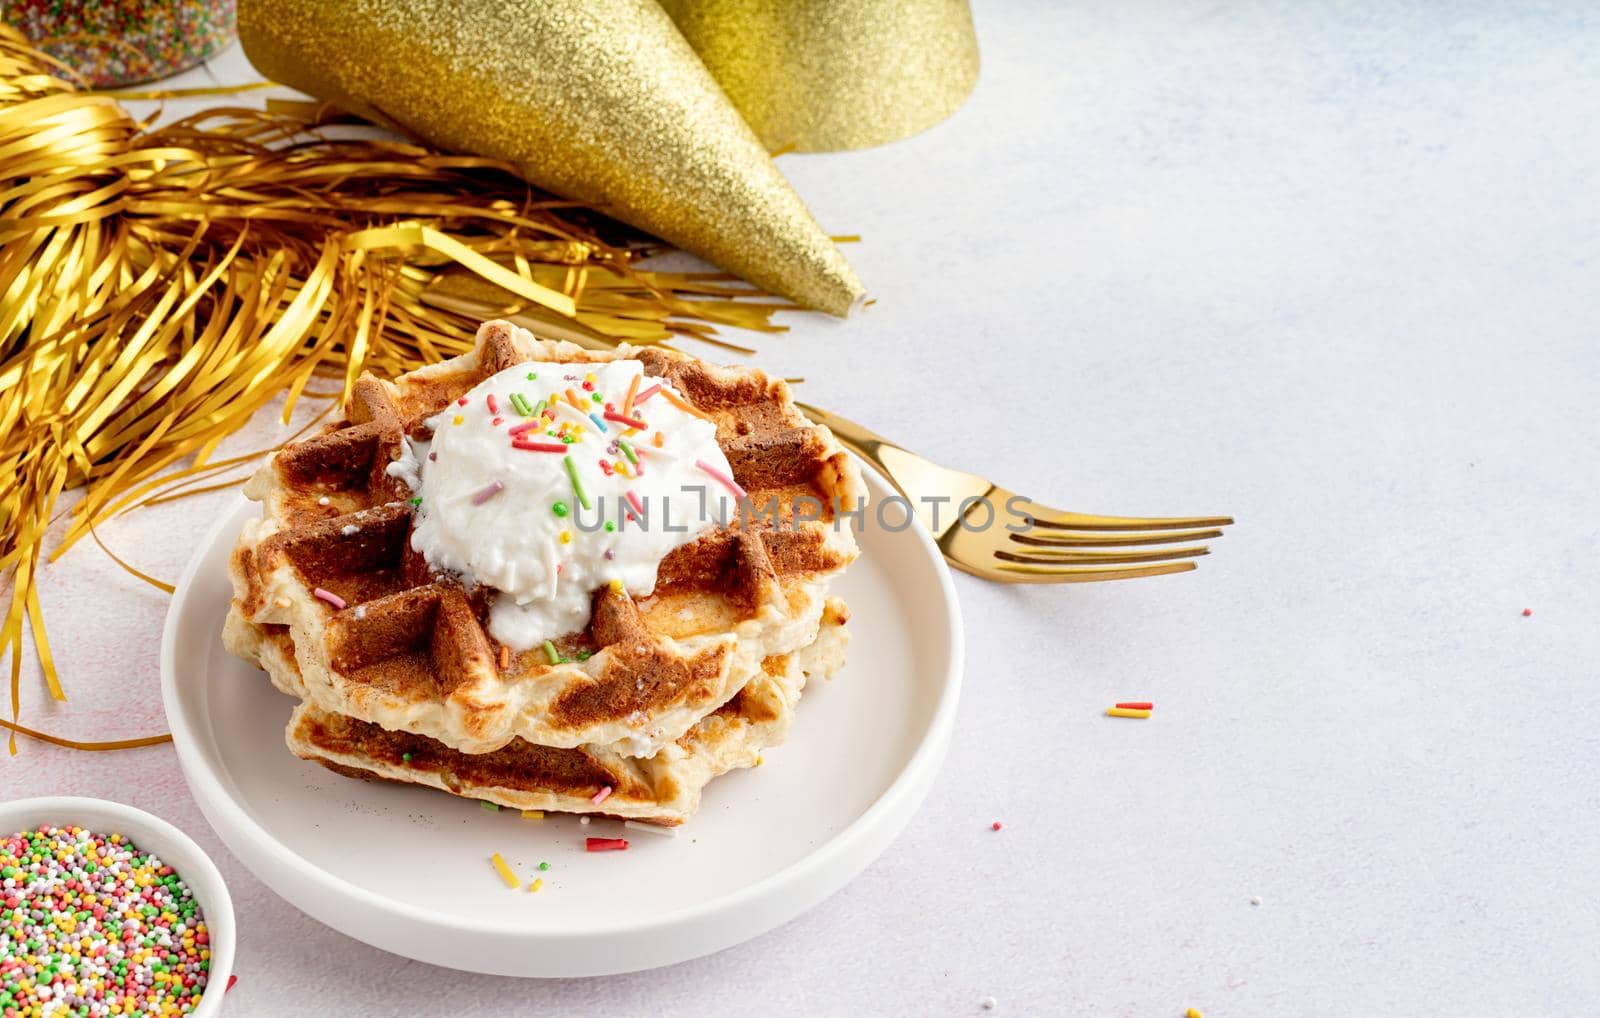 Birthday party waffles with youghurt and colorful sprinkles by Desperada